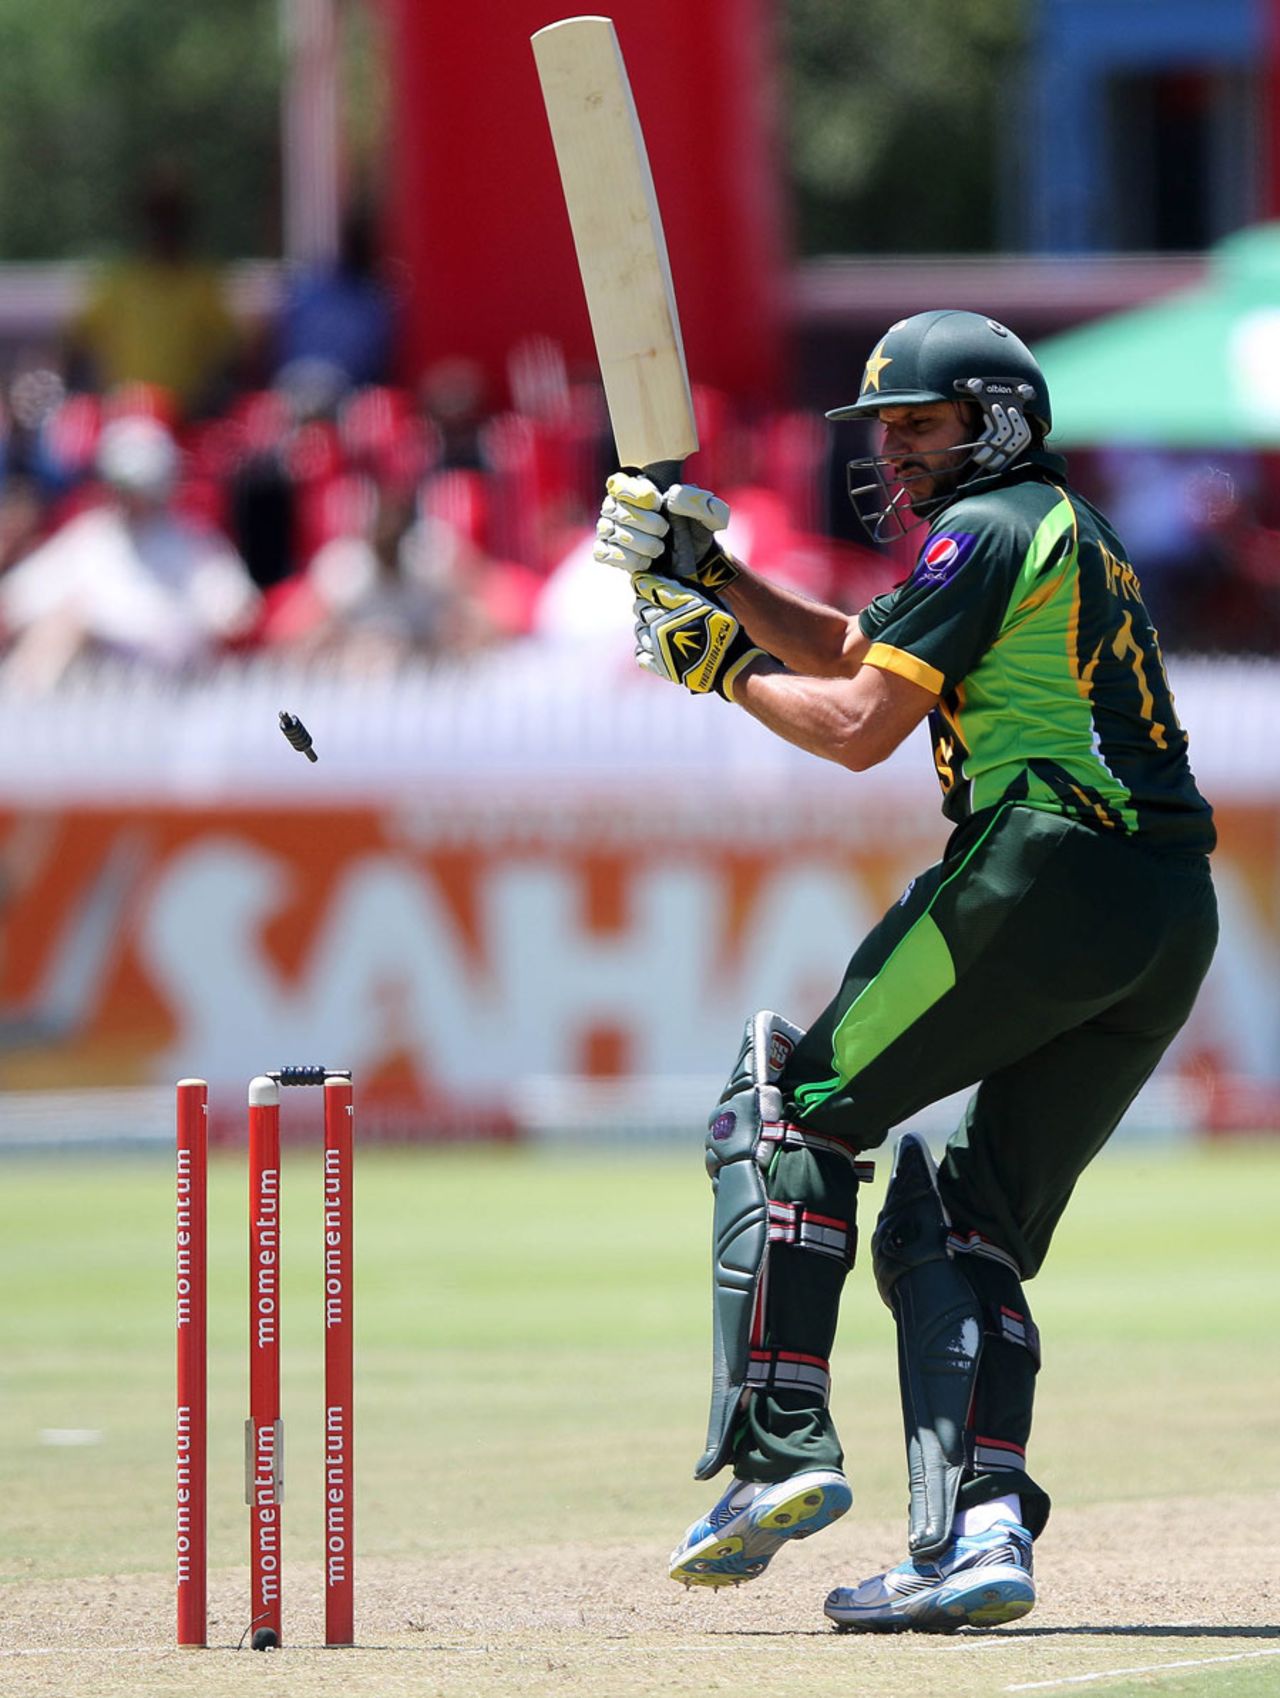 Shahid Afridi was bowled for 26, South Africa v Pakistan, 1st ODI, Cape Town, November 24, 2013